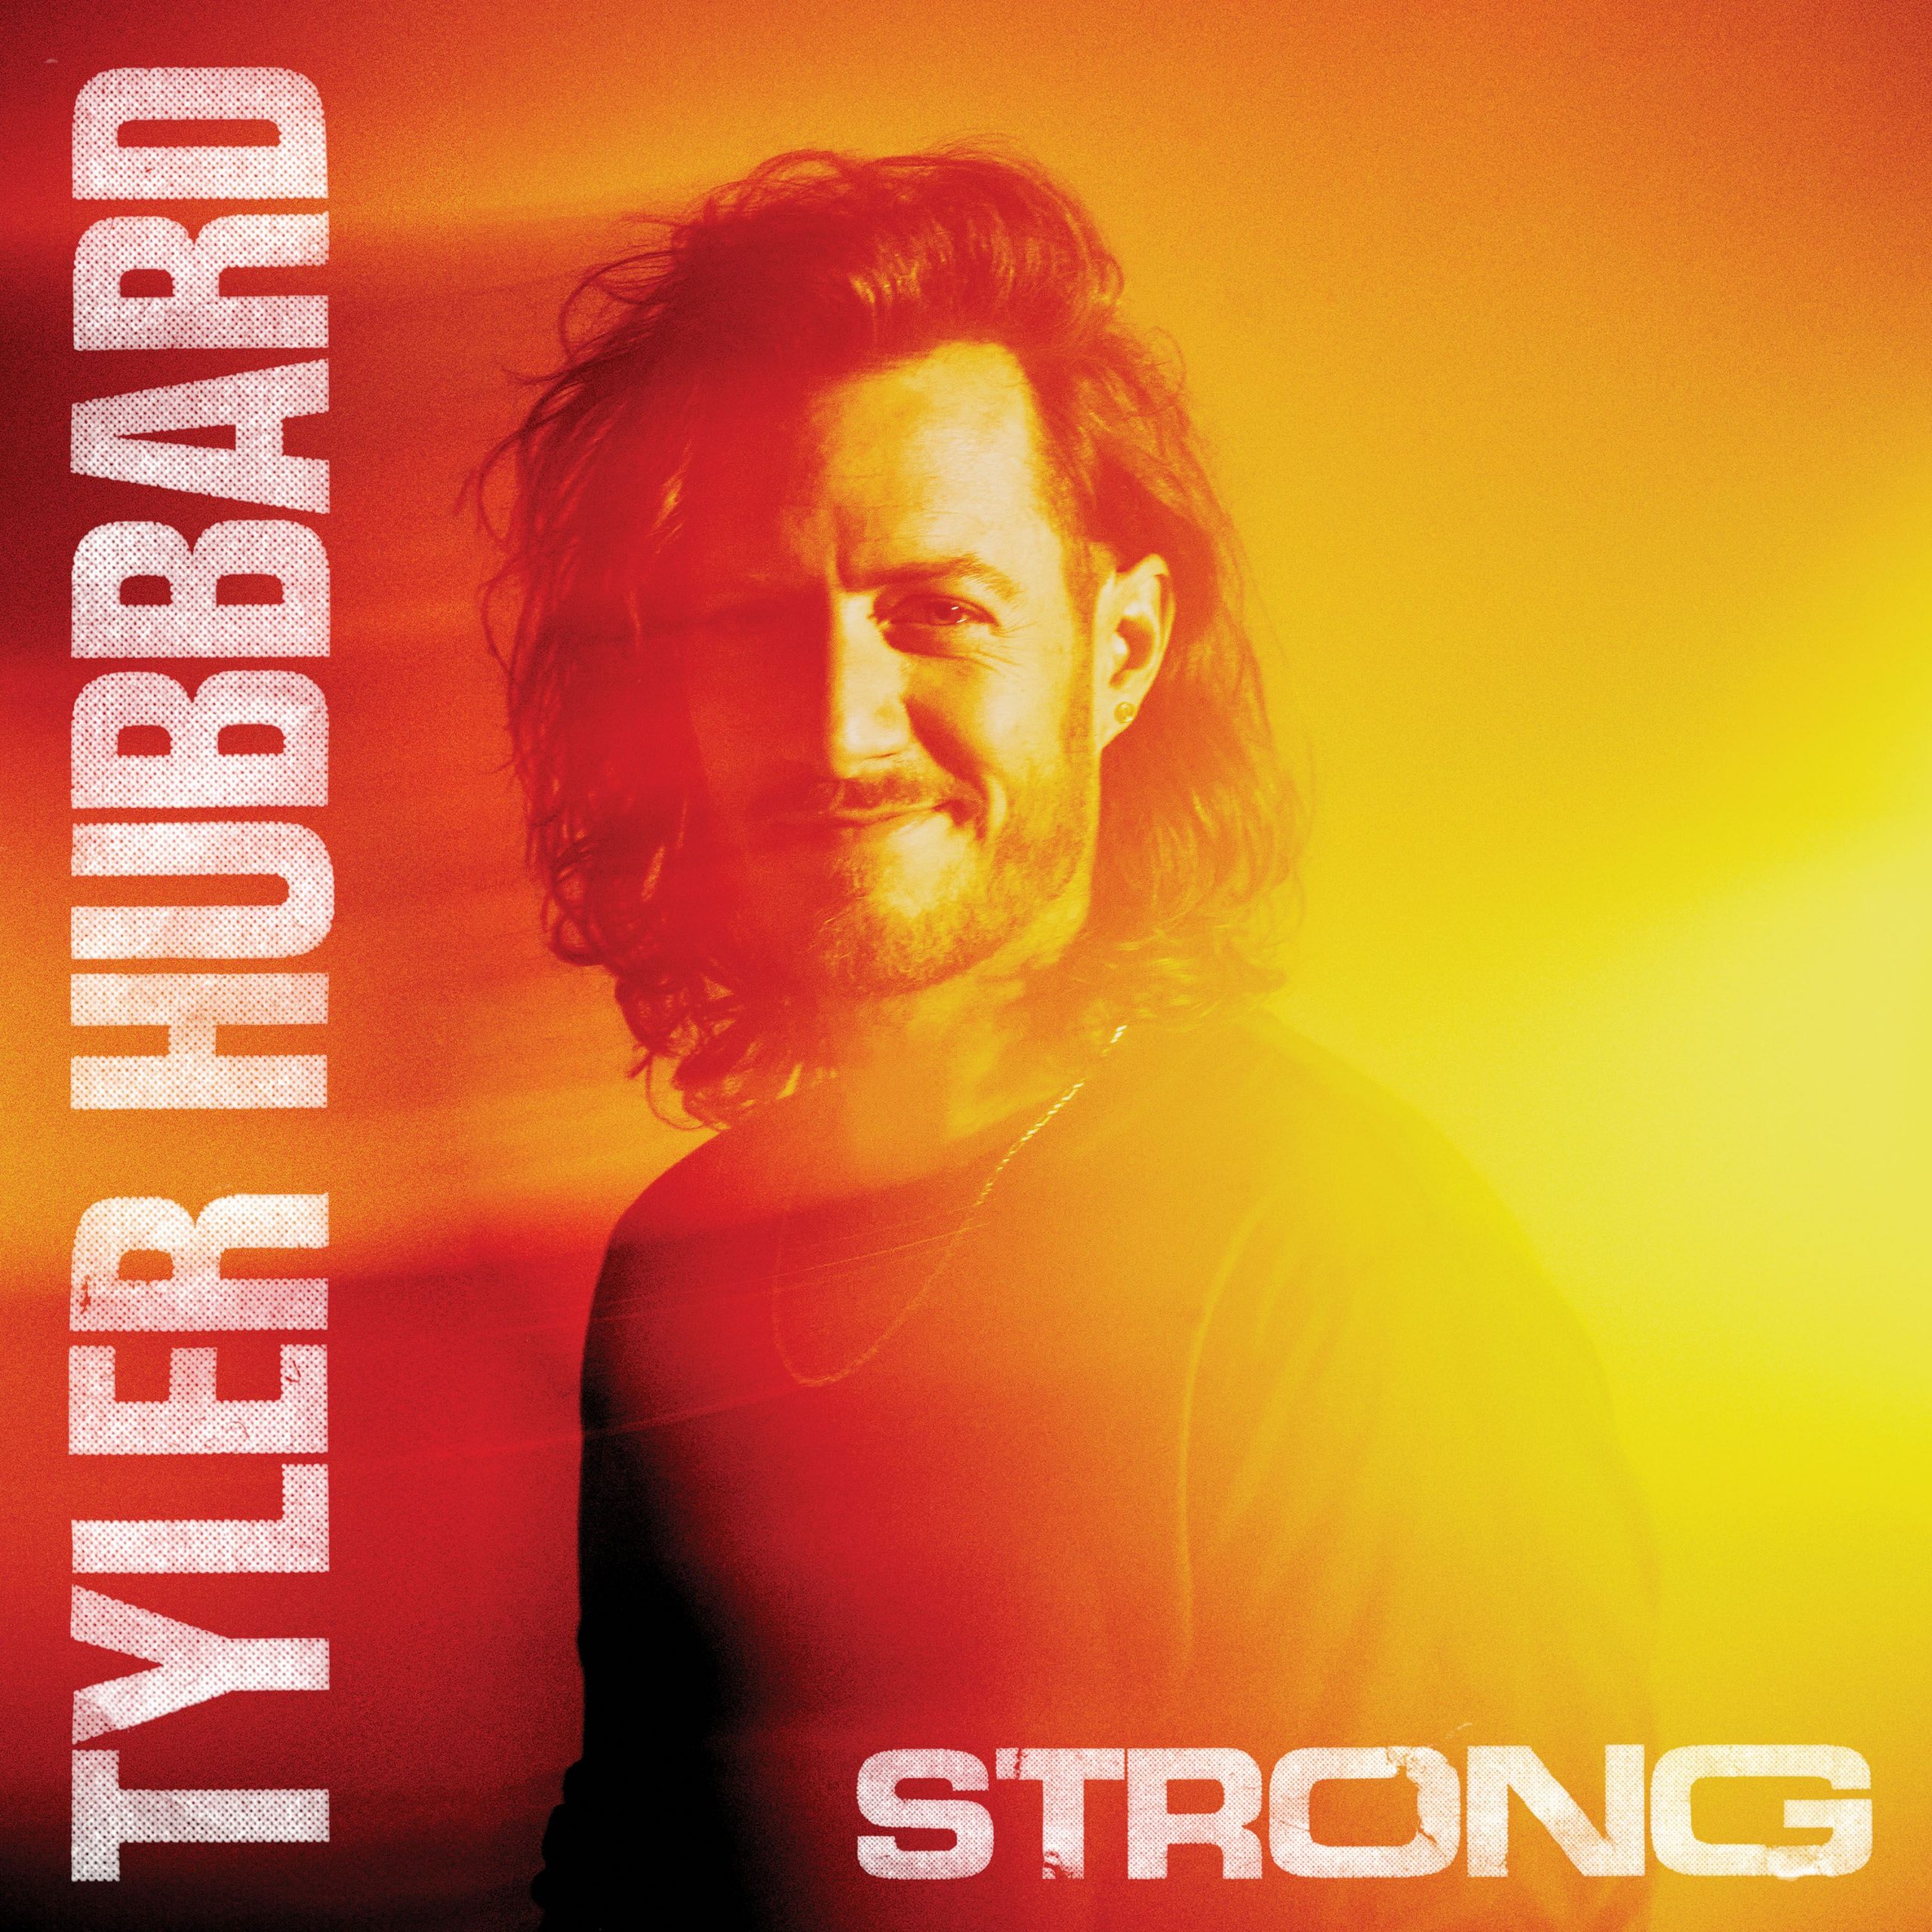 Tyler Hubbard Continues Ascent as Songwriter and Artist on Sophomore Solo Album Strong Out Now